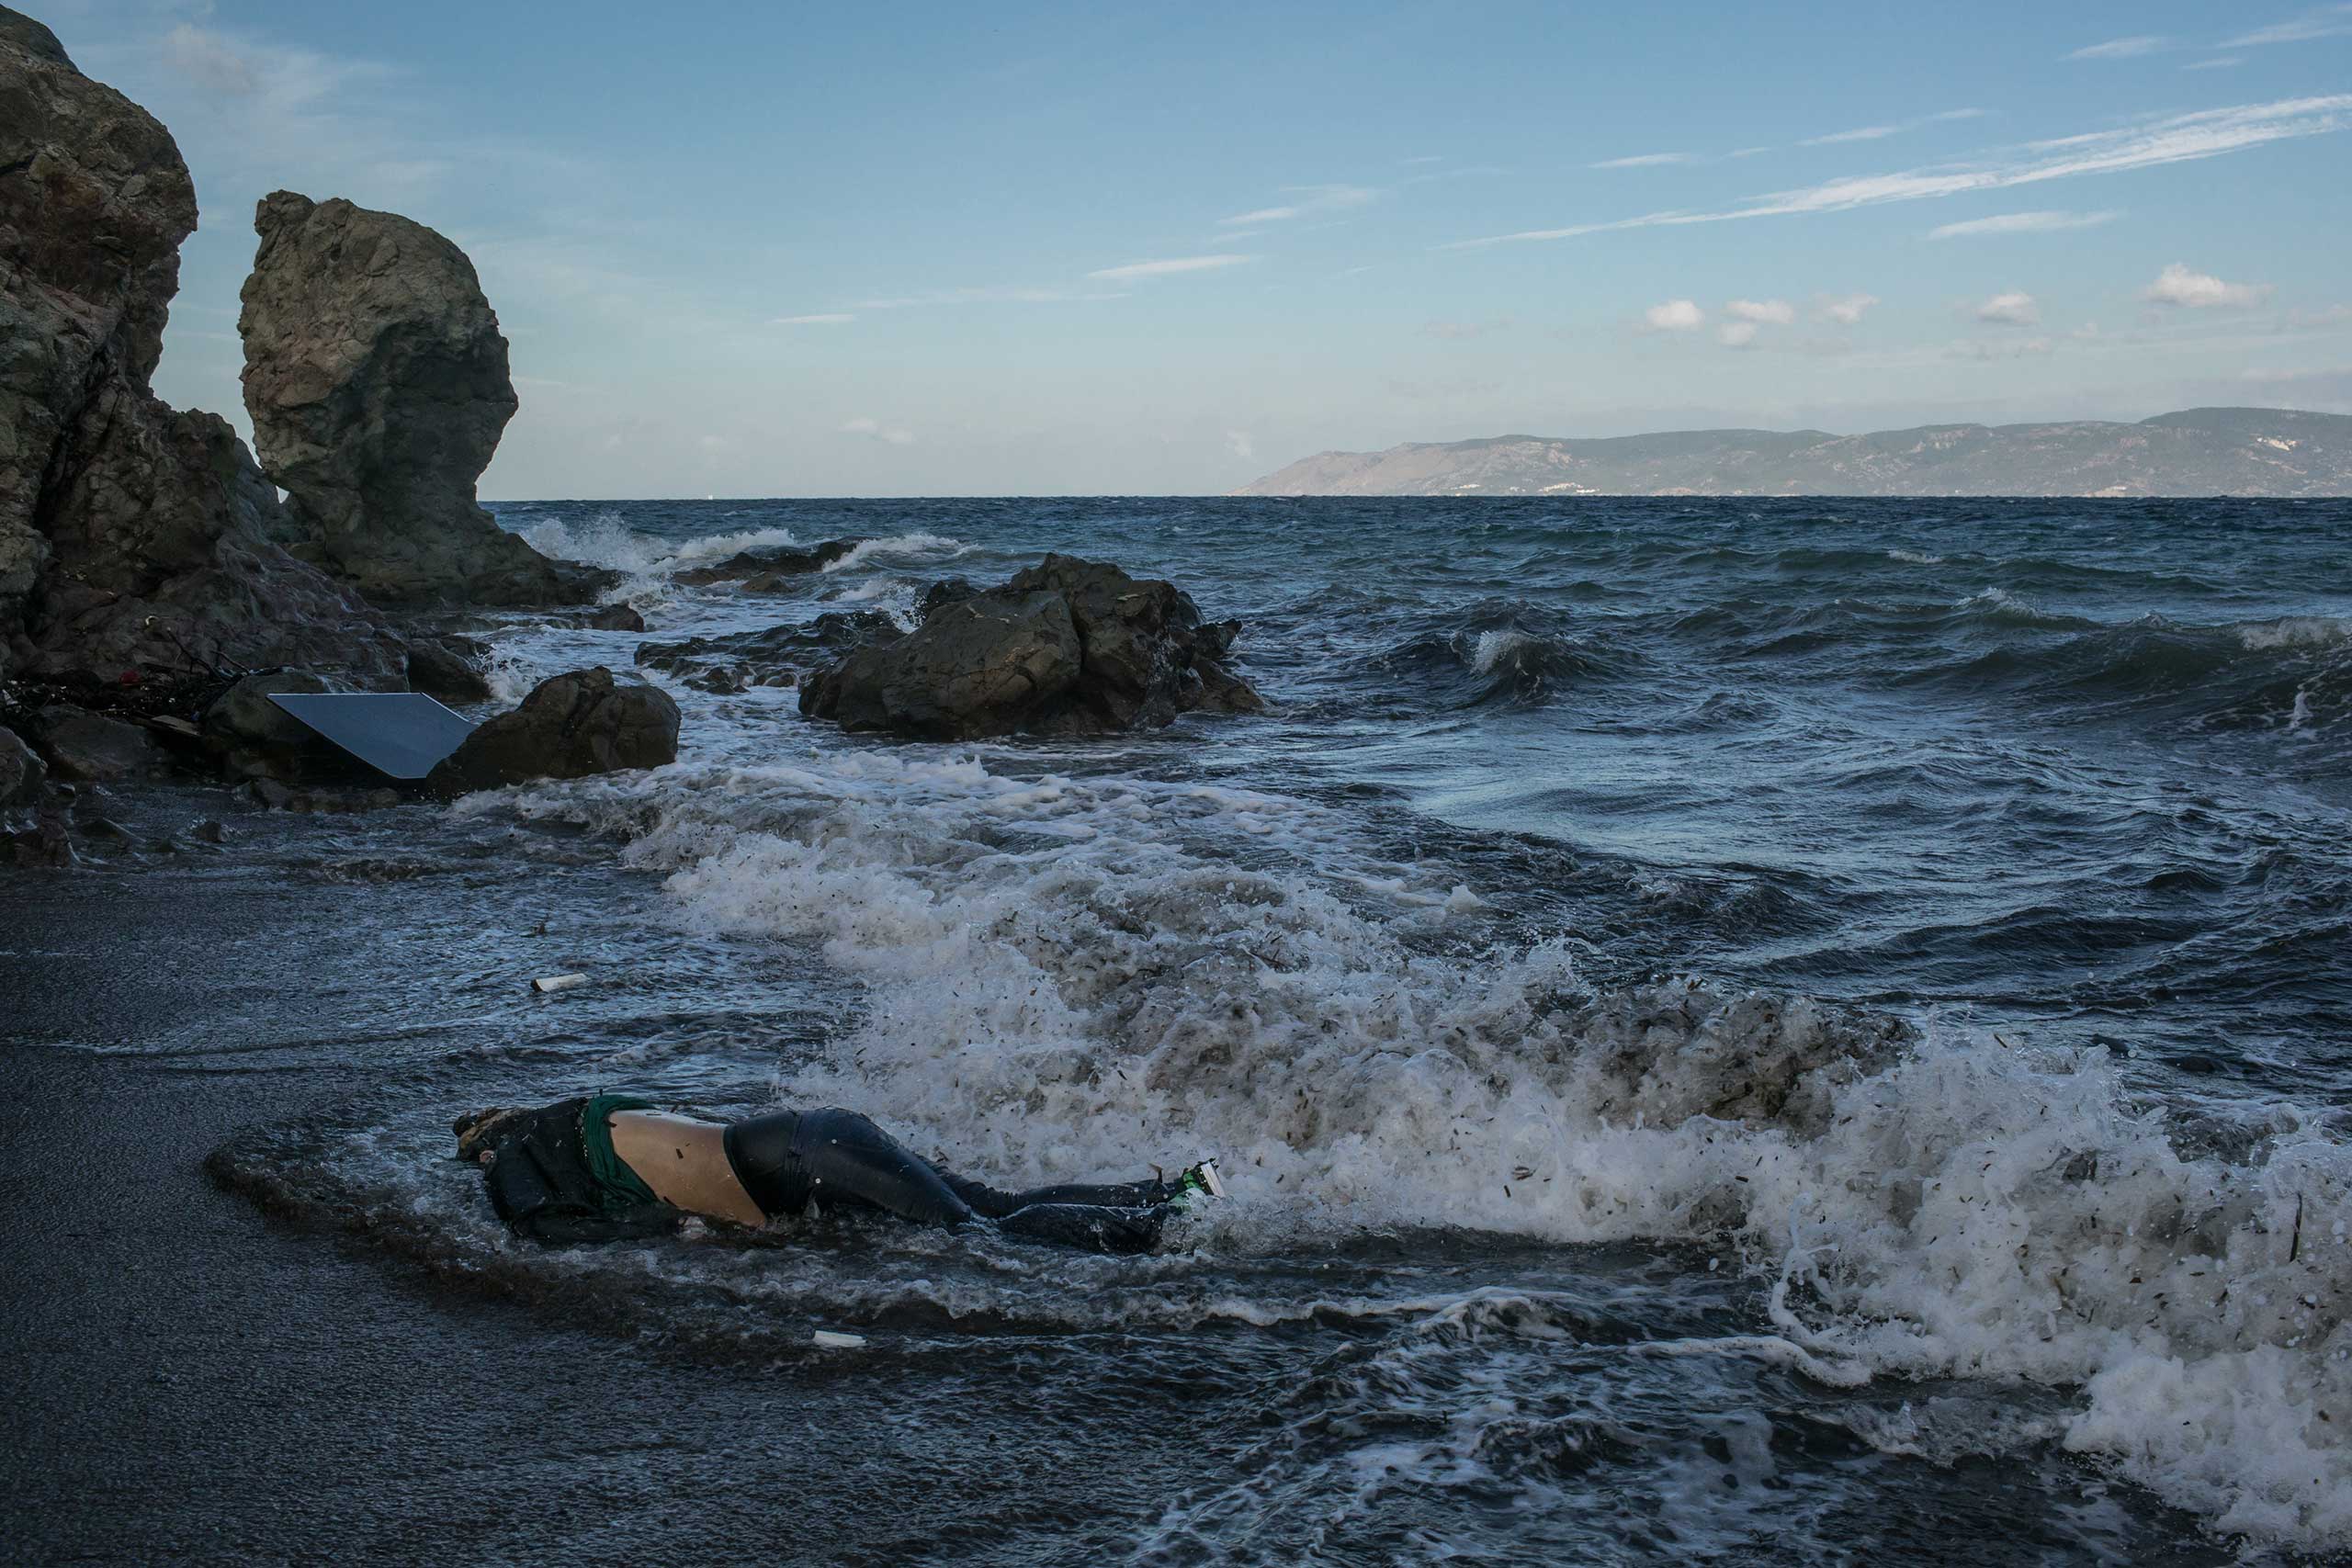 The body of a refugee who attempted to cross the Aegean Sea from Turkey, in the background, on the Greek island of Lesbos. Three other bodies, of a 12-year-old girl, a middle-age man and an elderly man, were also found that morning. Nov. 1, 2015.